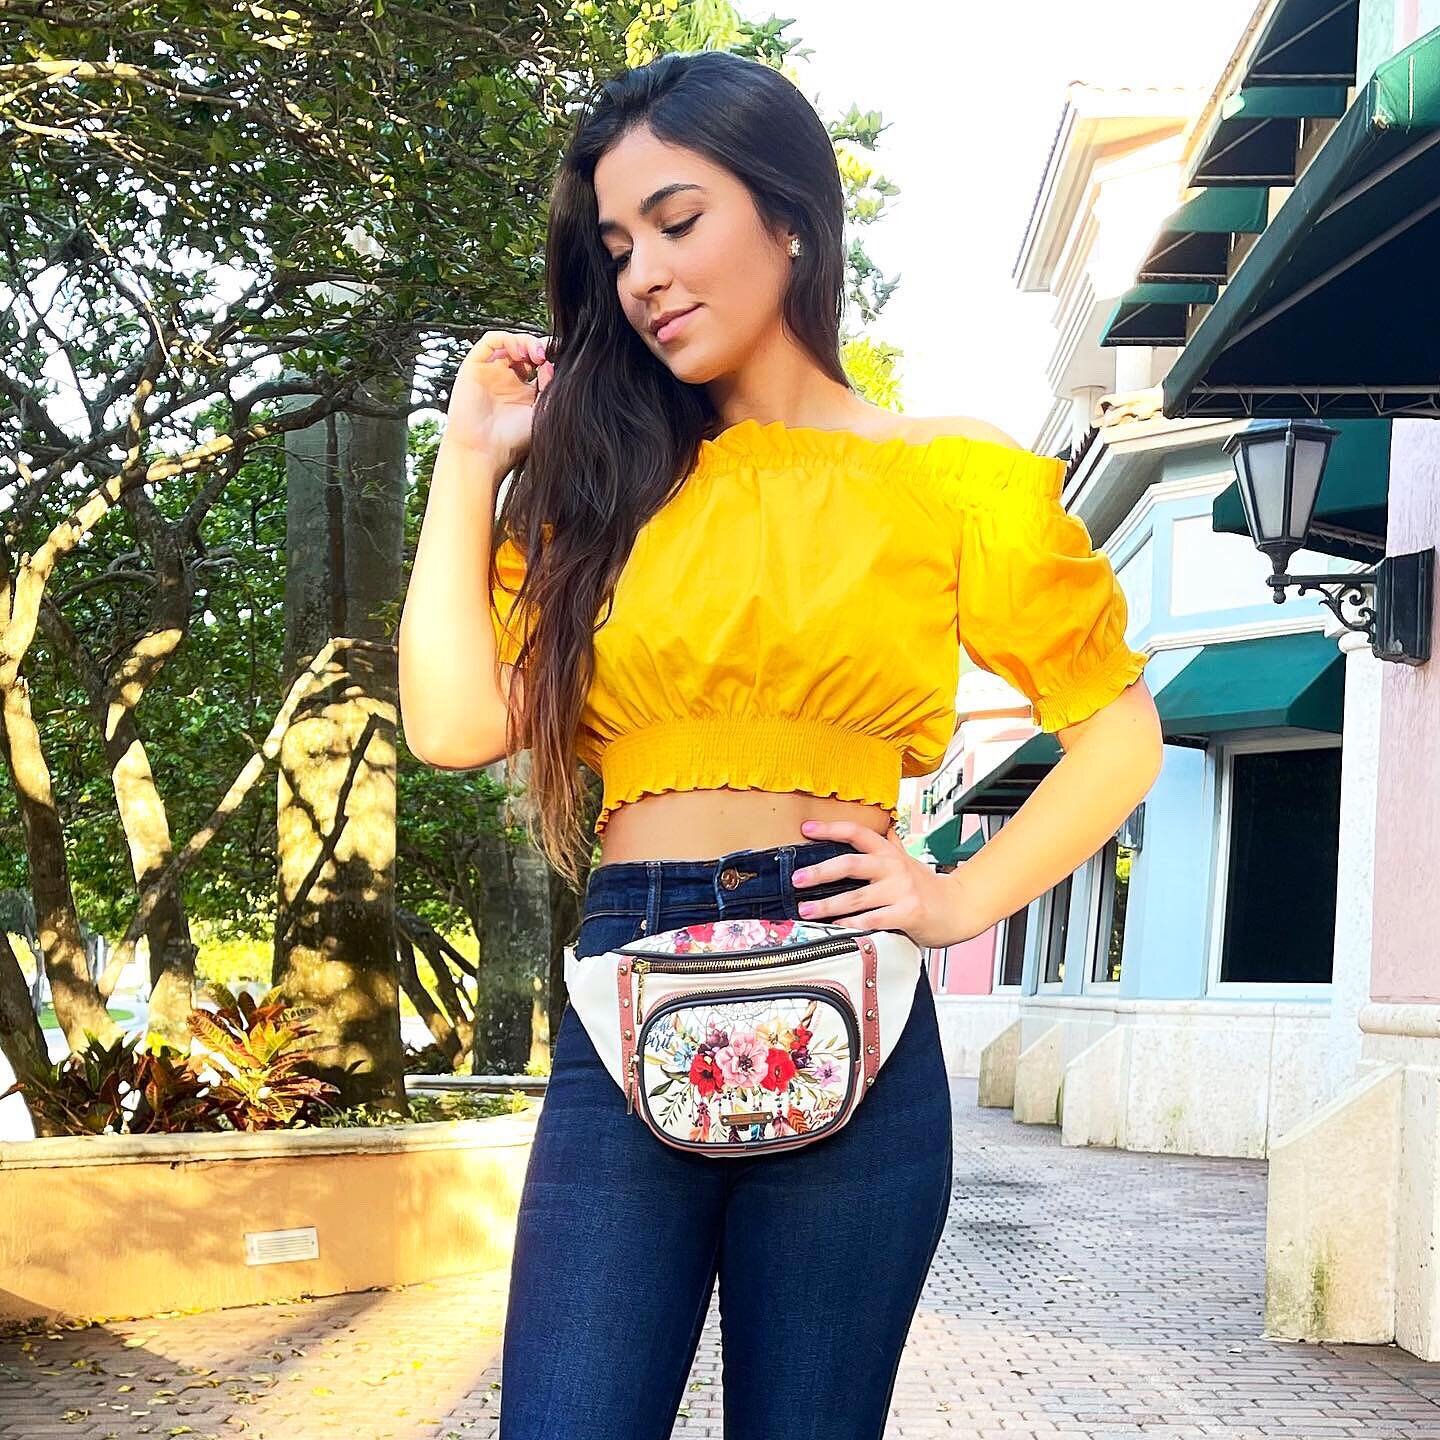 Meet your perfect accessory bag, the fashion print zipper fanny pack for everyday use!👛🪶💕 Tap the picture to see prices or visit our official website to shop our new arrivals! (Link in bio)

📸 credit: @sofikaram 

#nicoleleeusa #nicolelee #nicole